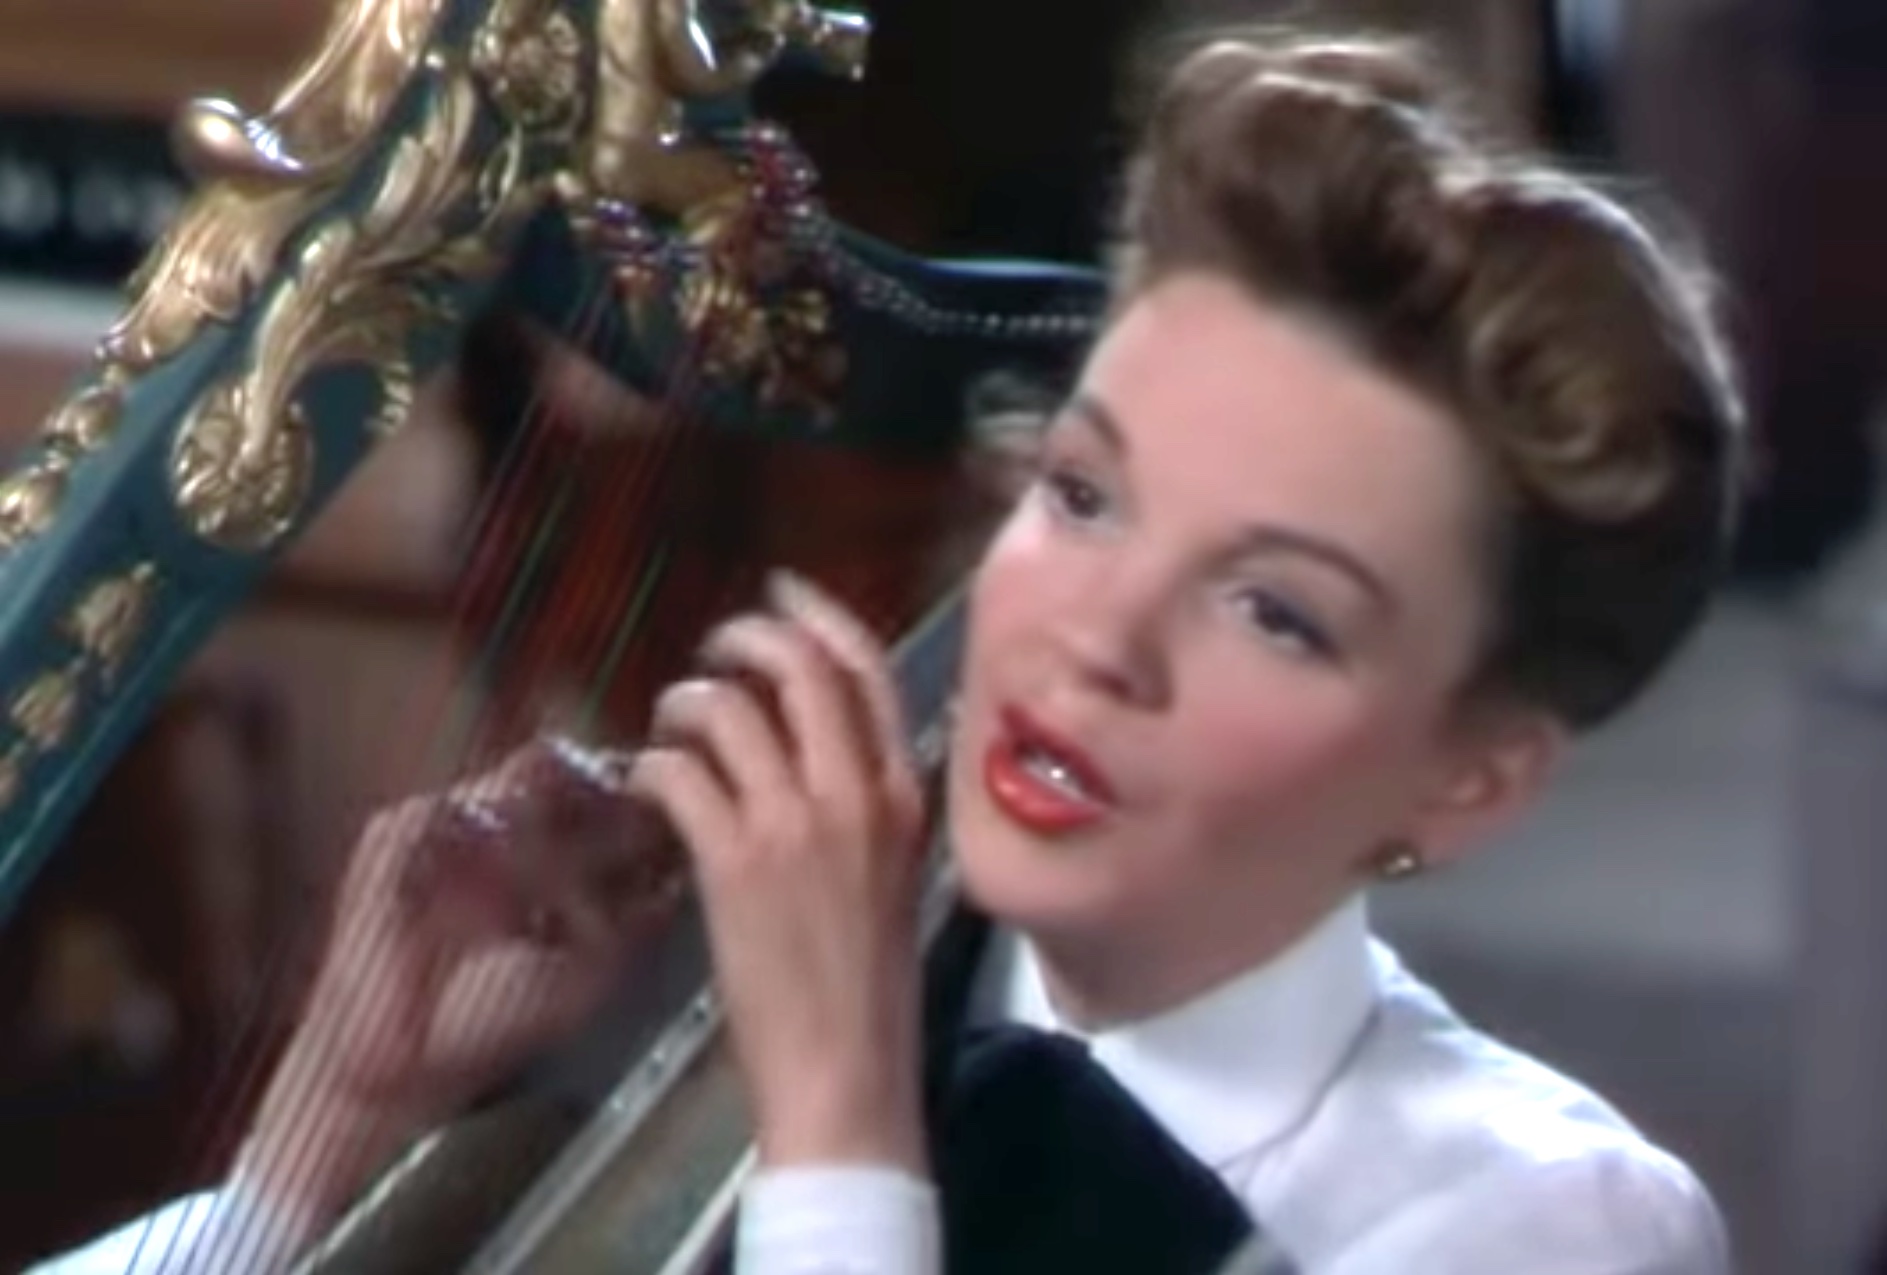 Song lyrics to Meet Me Tonight in Dreamland, Music by Leo Friedman, Lyrics by Beth Slater Whitson. Sung by Judy Garland in In The Good Old Summertime